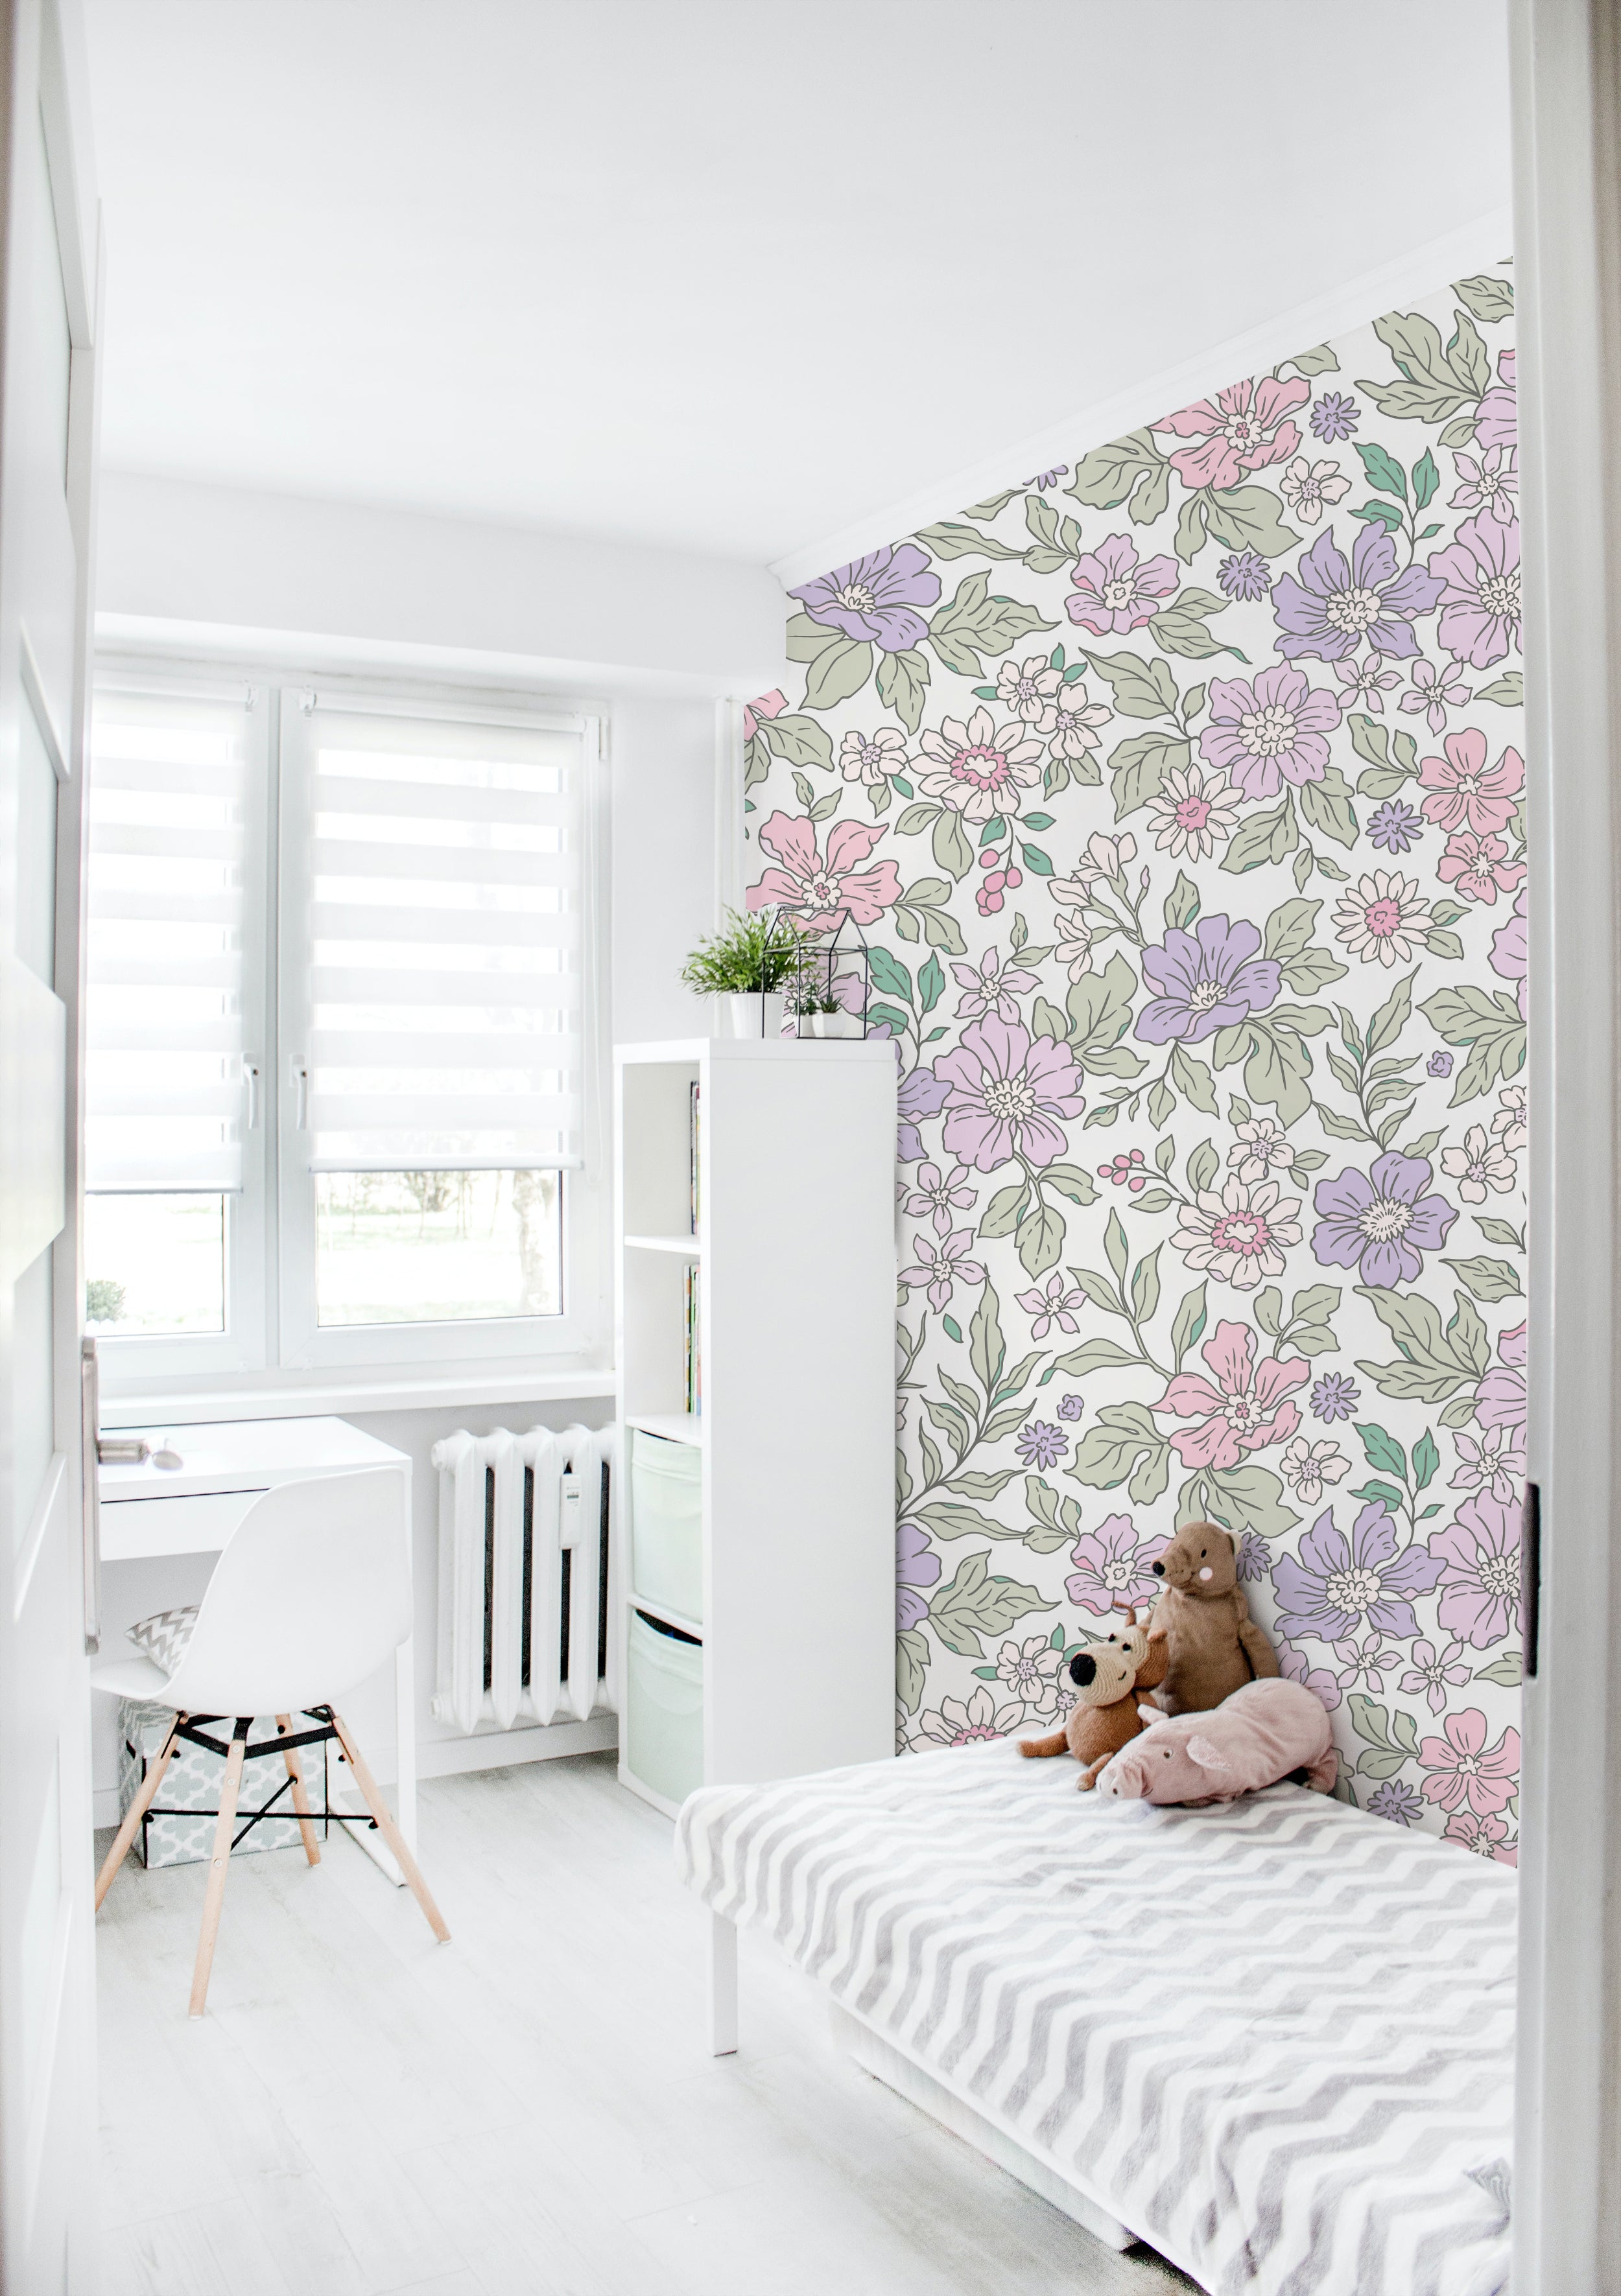 A bright and airy bedroom with a floral wallpaper accent wall. The wallpaper features a whimsical pattern of pastel-colored flowers in pink, lavender, and green. The room includes a small white desk, a bookshelf, and a bed with striped bedding, adorned with plush toys.